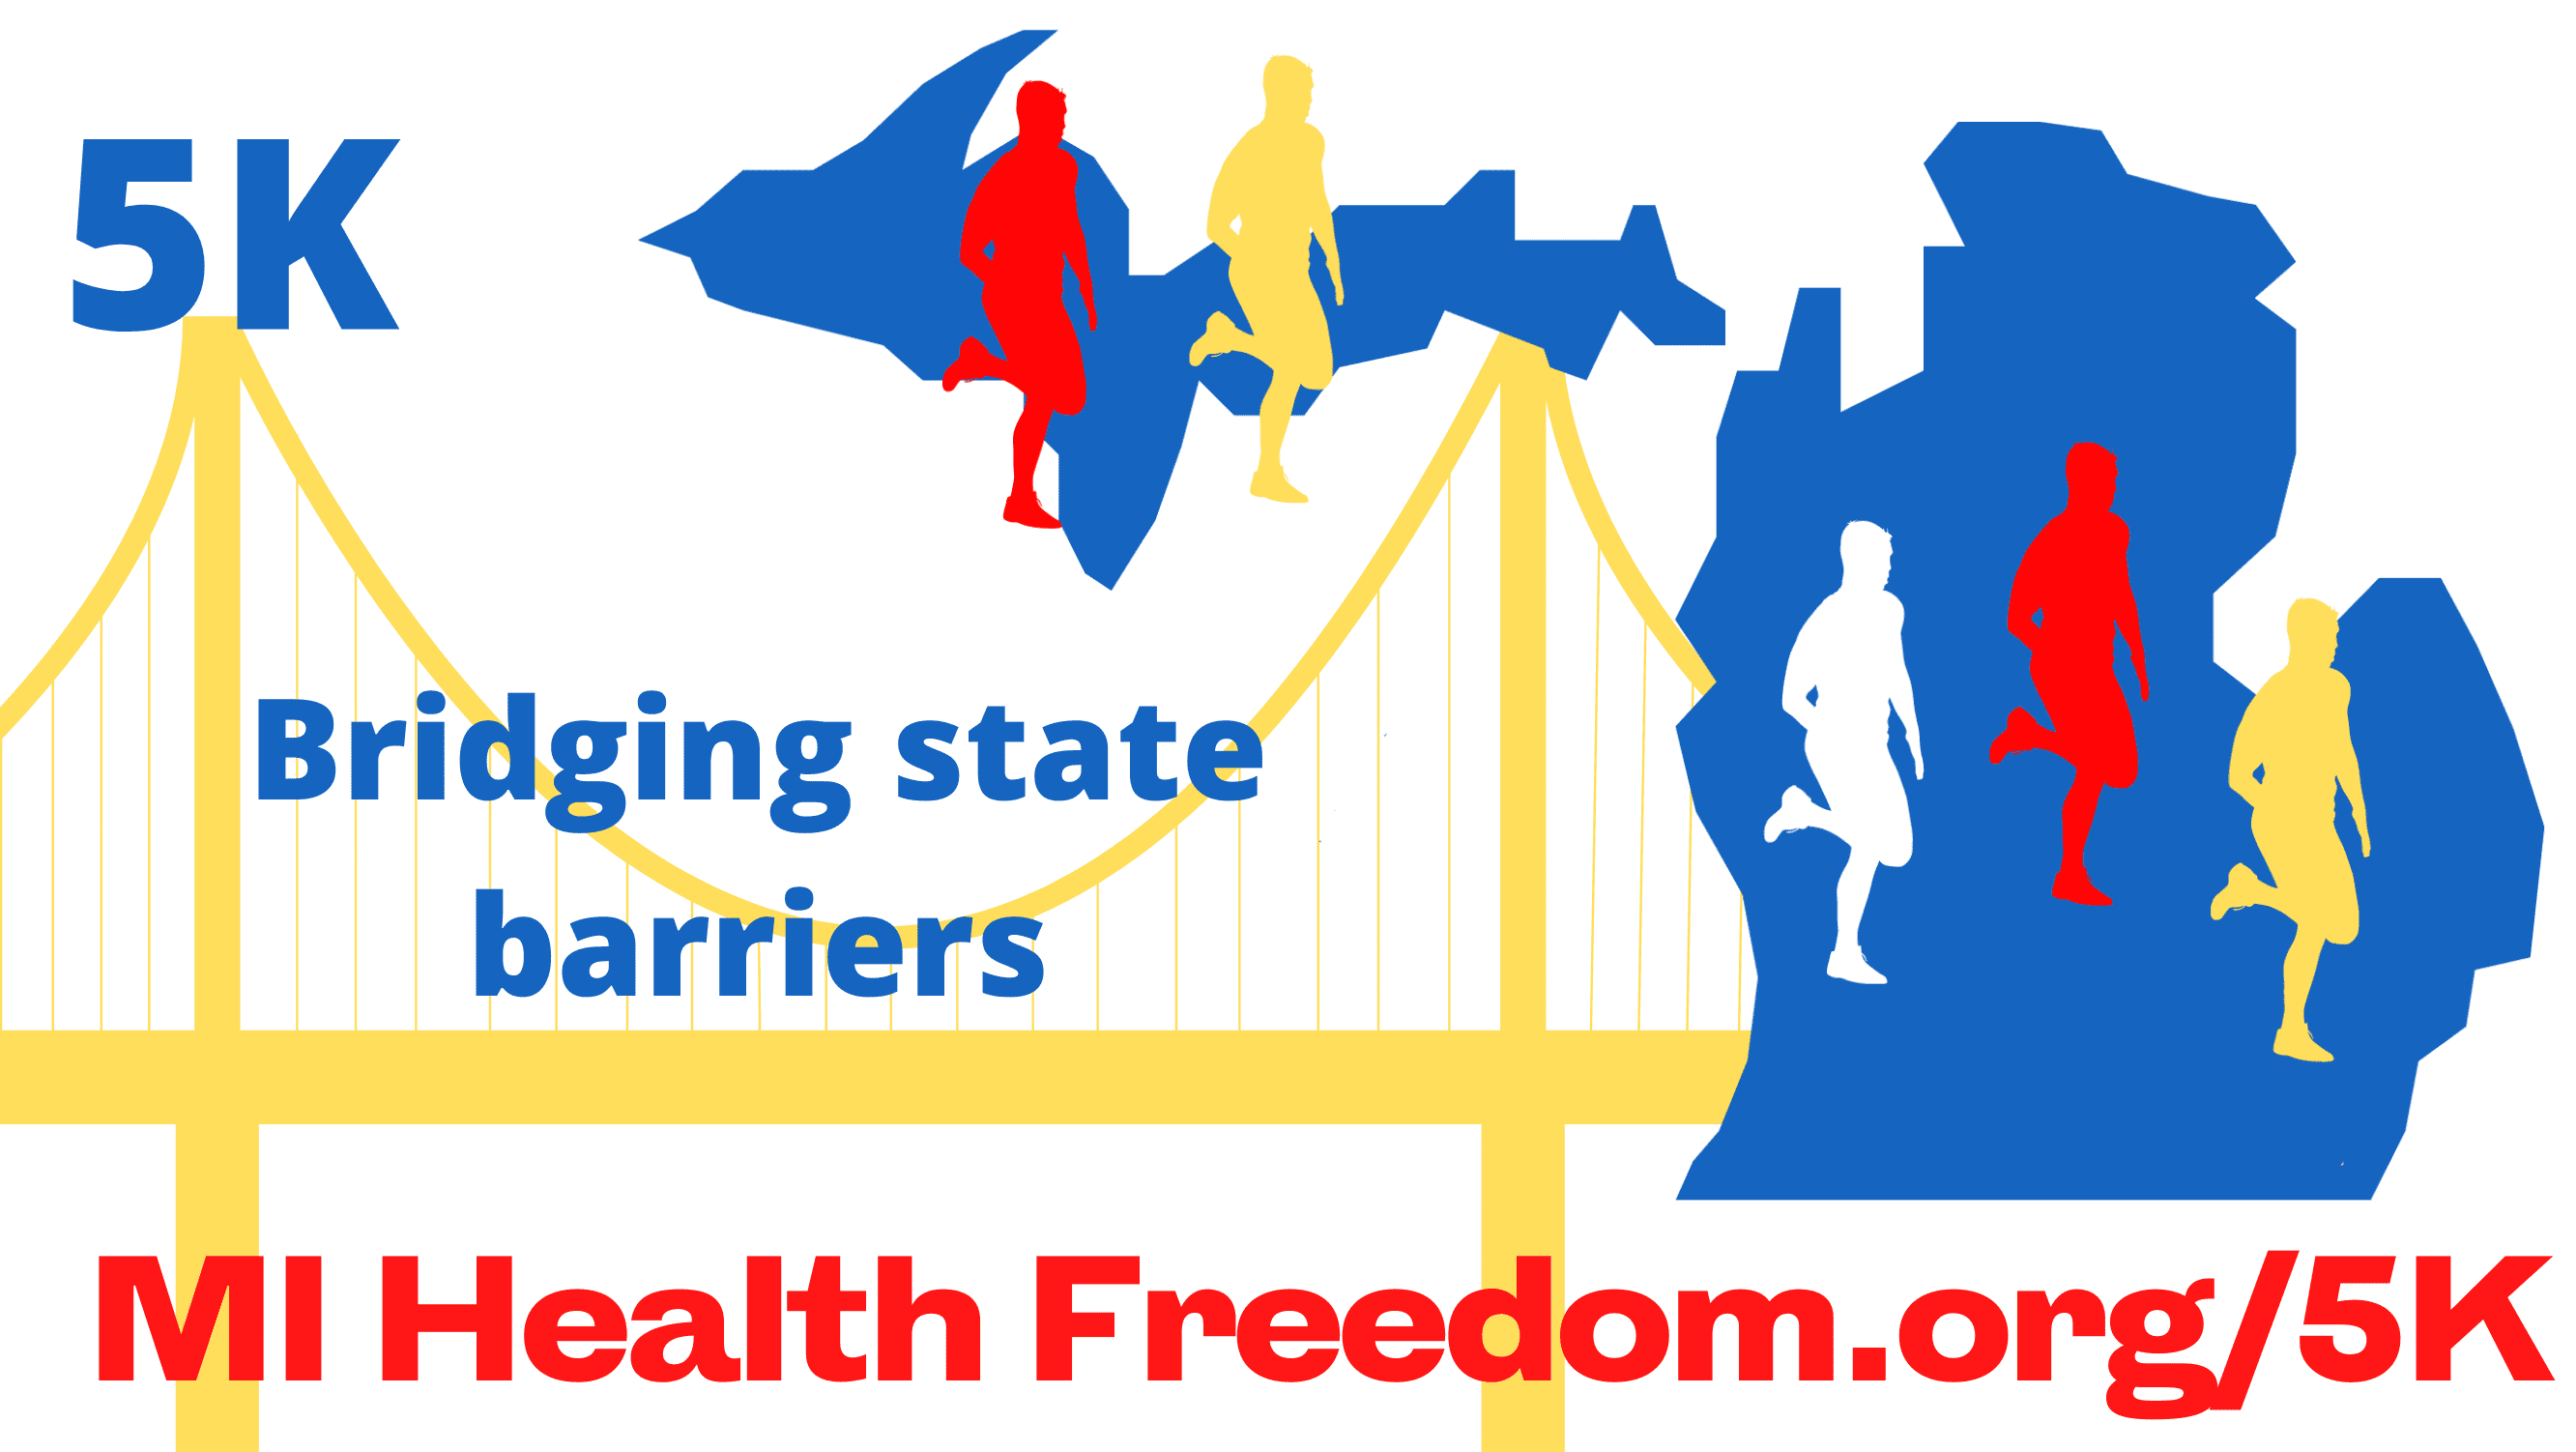 MHF 5K for healthcare freedom